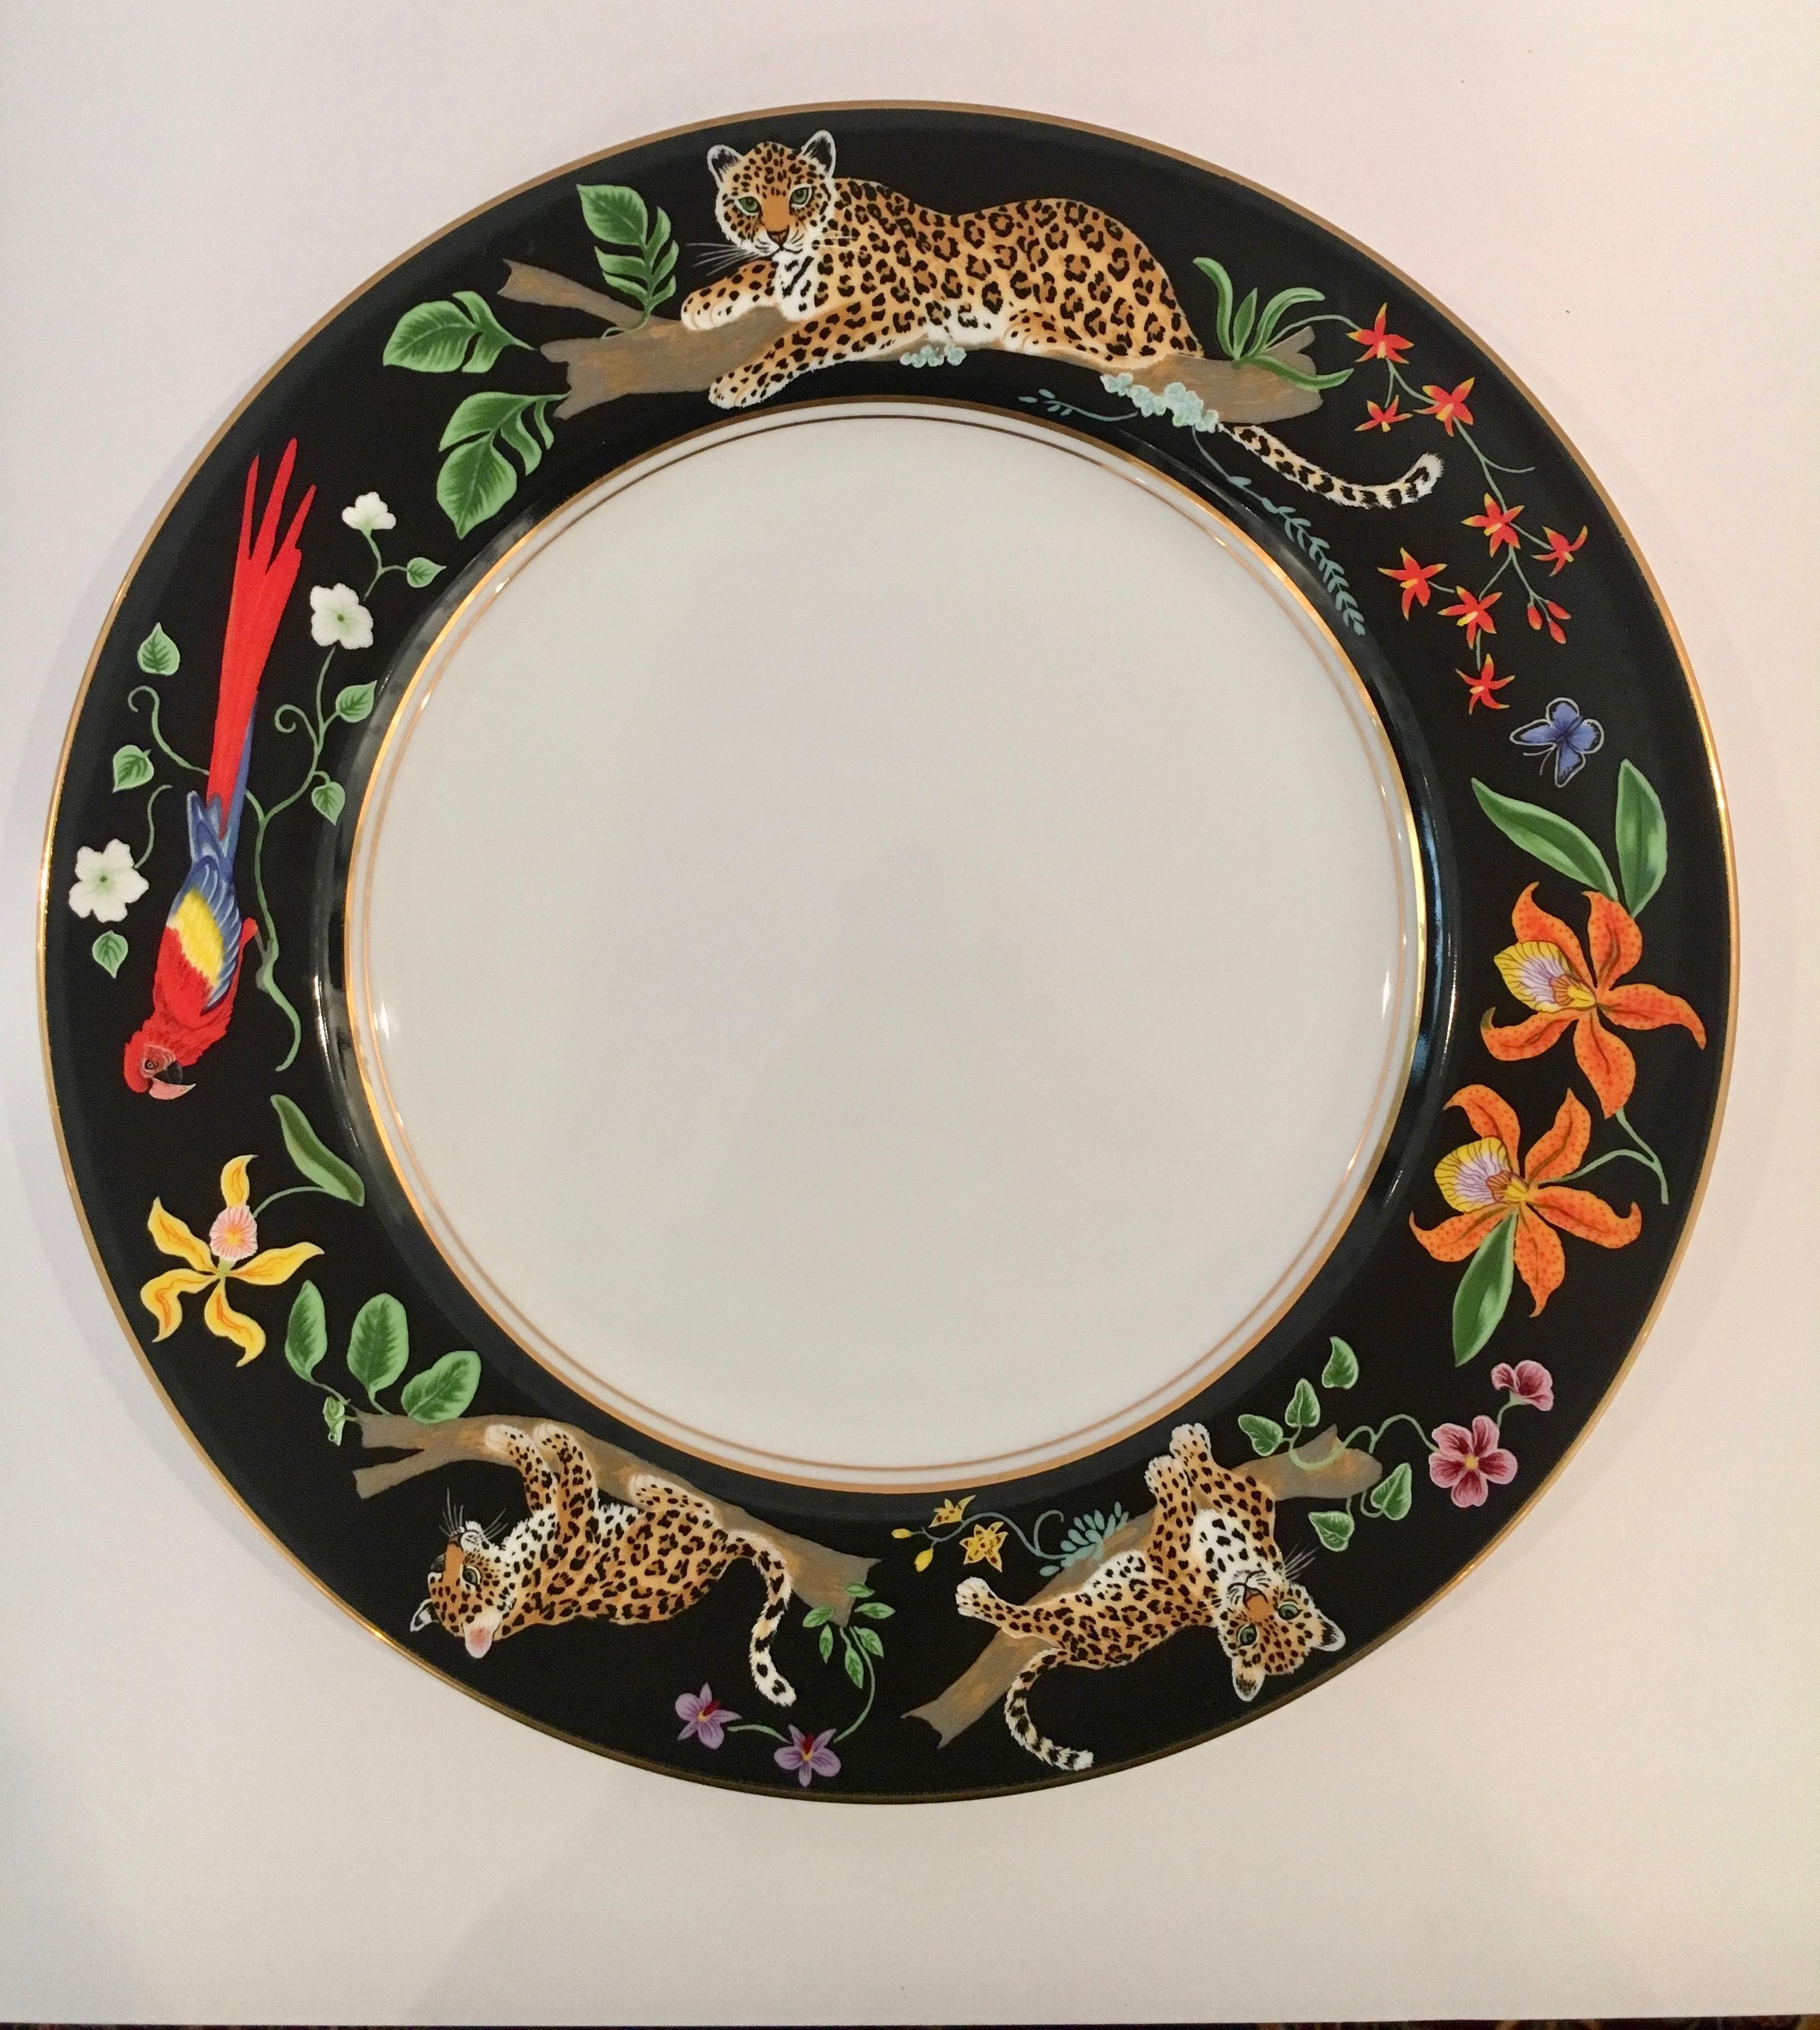 Lynn Chase 12 piece place setting with additional pieces, Jaguar Jungle in porcelain with 24 carat gold hand-painted accents.
12 - 12” dinner plates
12 - 8.25” salad plates
11 - 2.25”h x 3”diameter cups
12 - 5.5” saucers
12 - 9.25” large rim